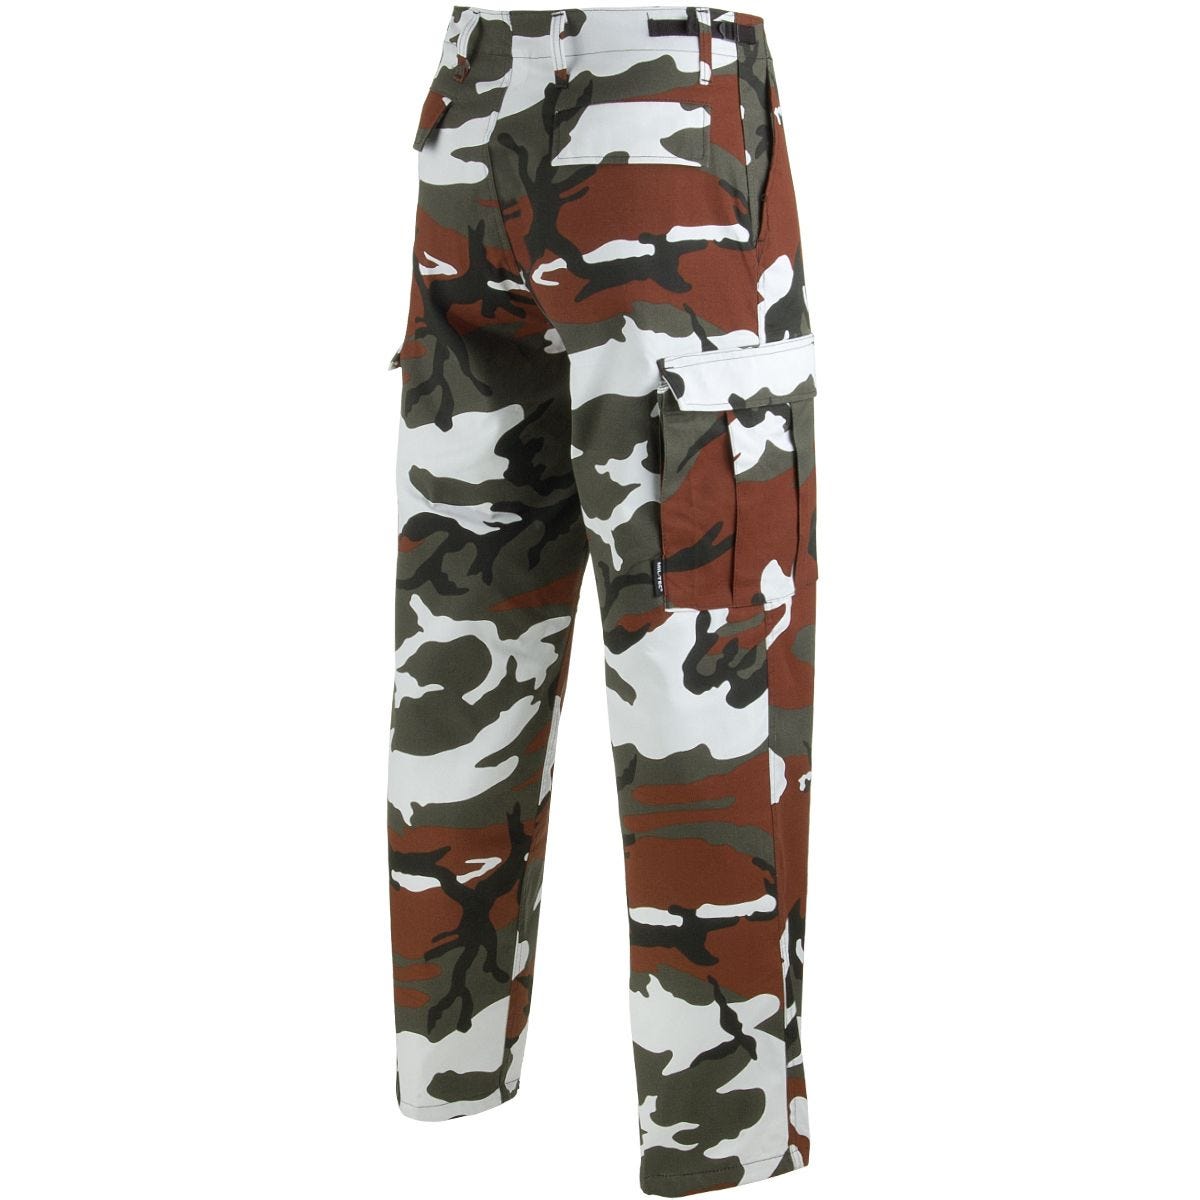 Official Mil-Tec BDU Ranger Combat Trousers Red Camo good quality ...